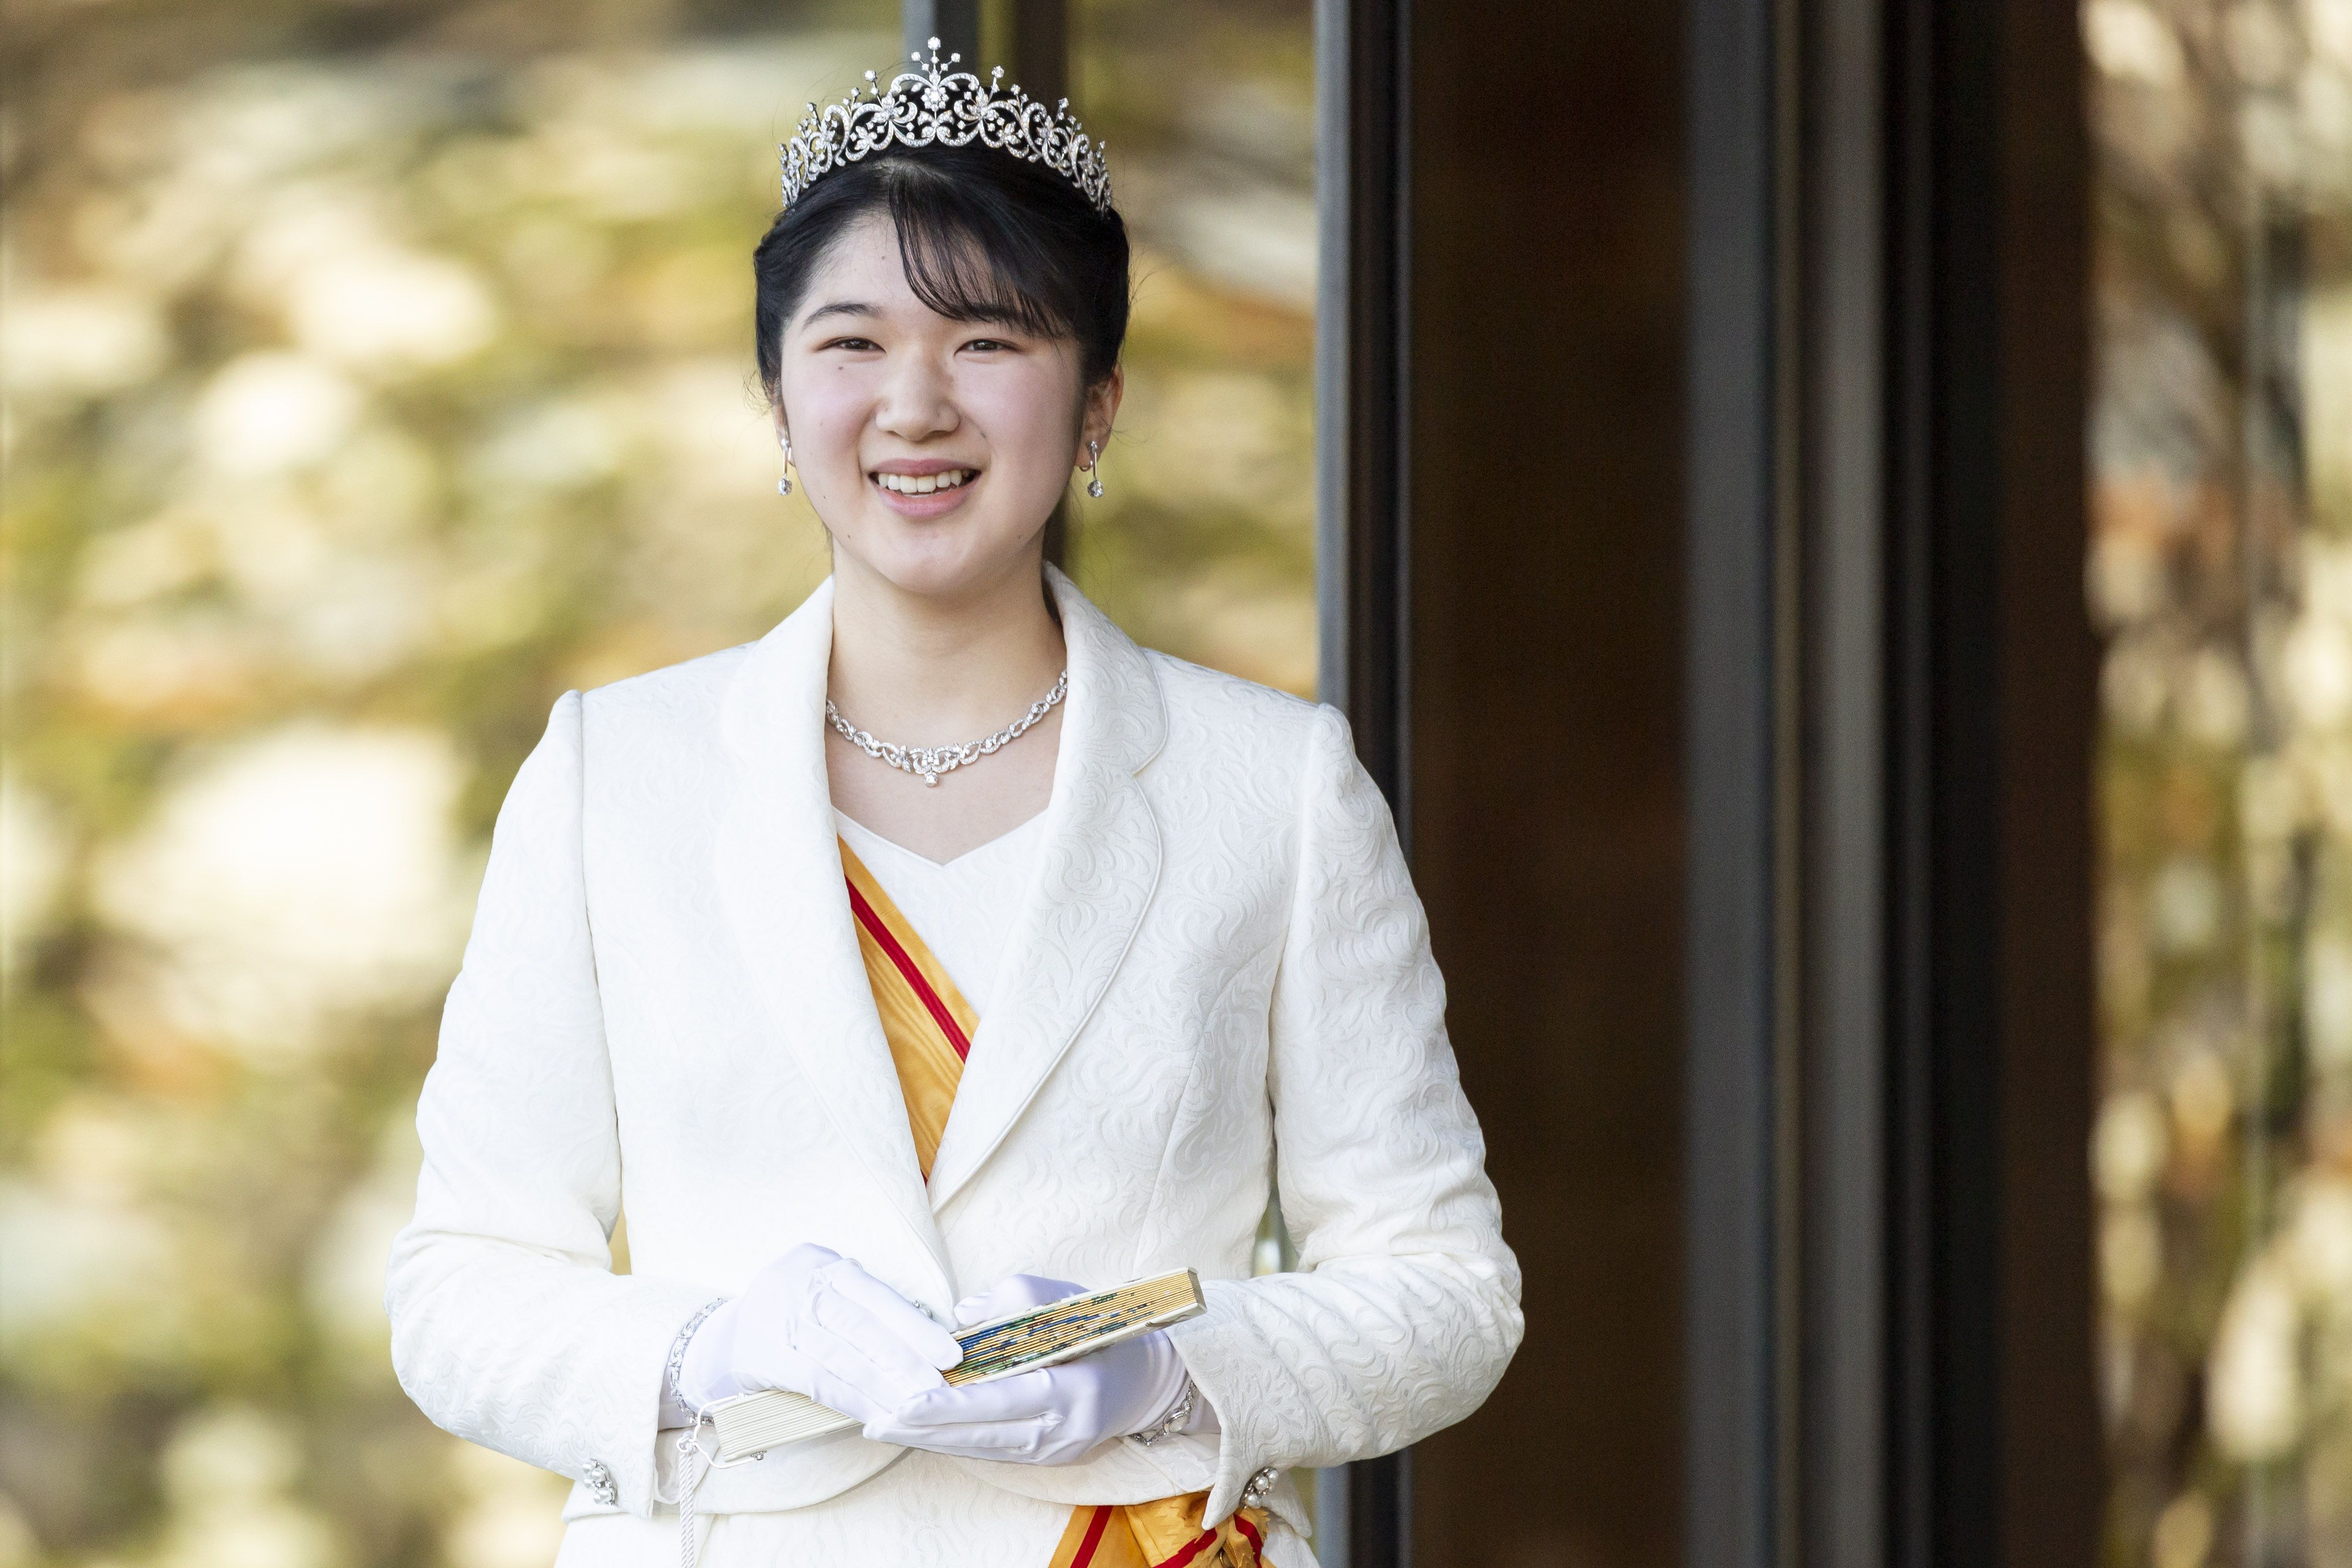 Japan's Princess Aiko Is "Heartbroken" by the Loss of Life in Ukraine